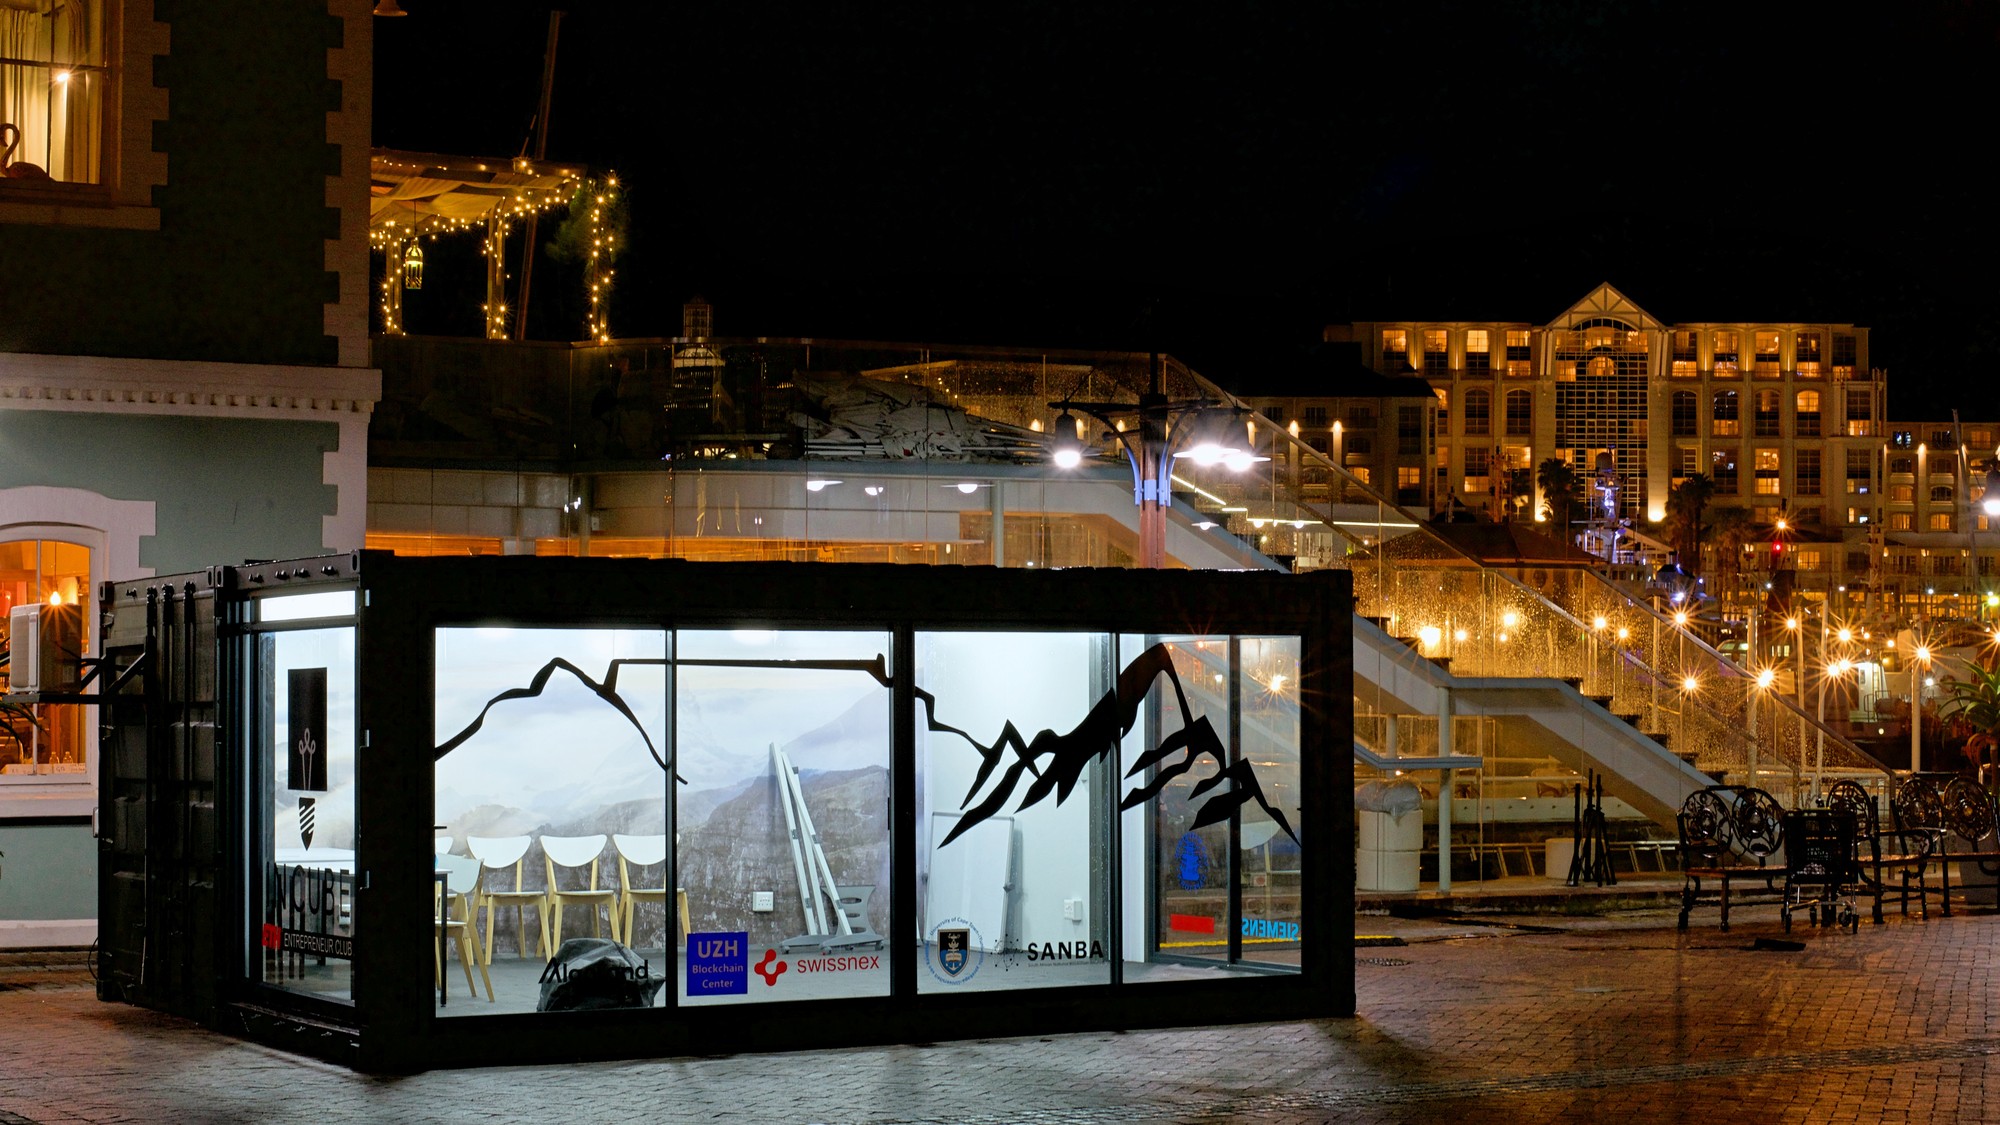 The InCube based at the V&A Waterfront in Cape Town at night.